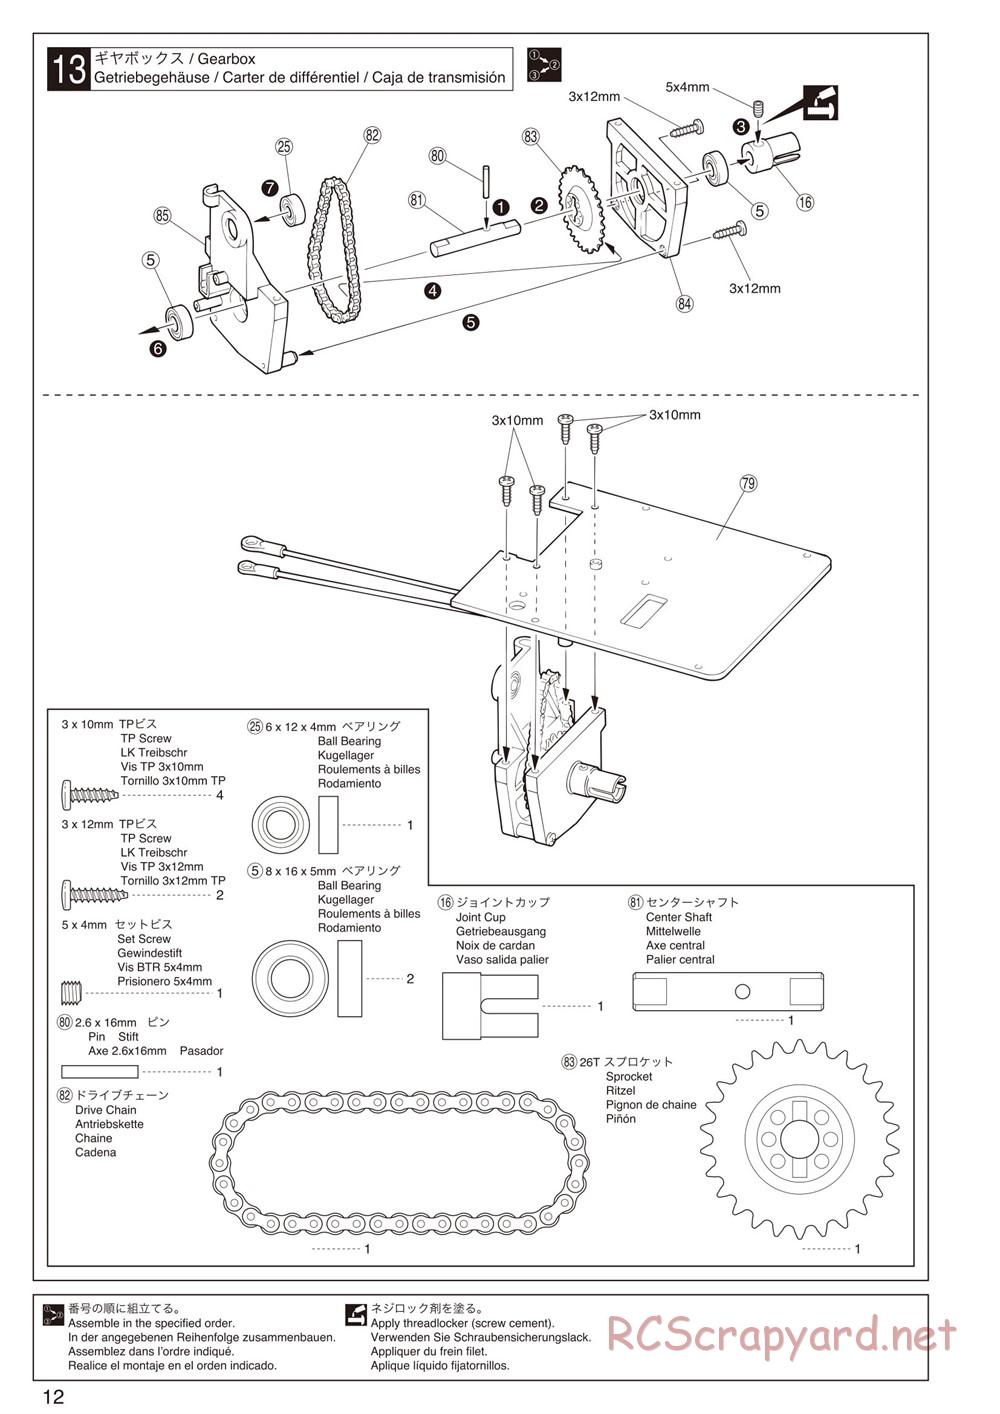 Kyosho - Mad Force Cruiser - Manual - Page 12